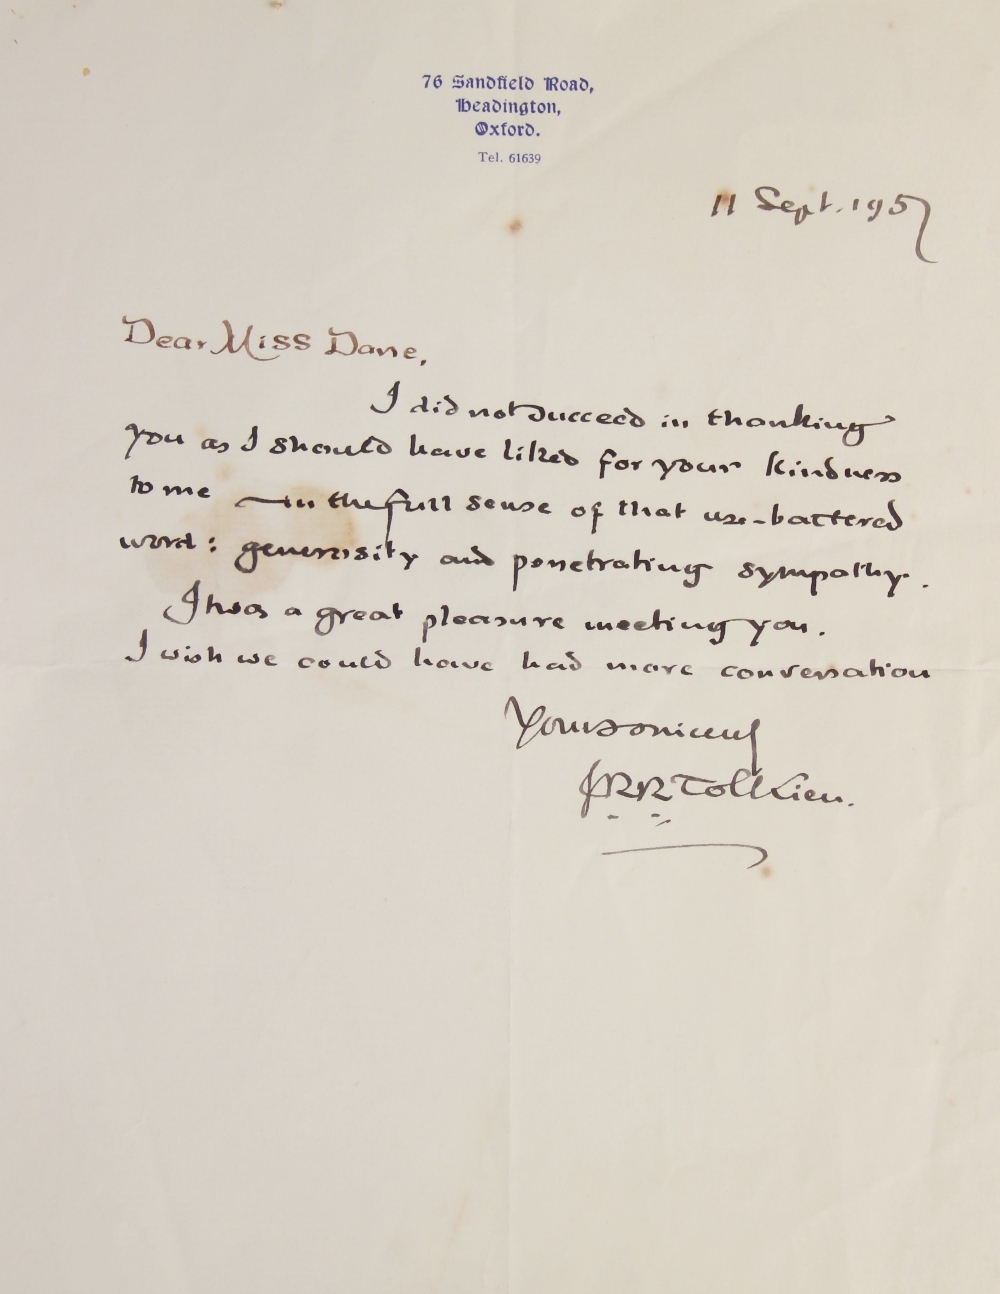 J.R.R. TOLKIEN INTEREST: A hand-written letter by J.R.R. Tolkien (1892-1973) on headed paper for - Image 2 of 6